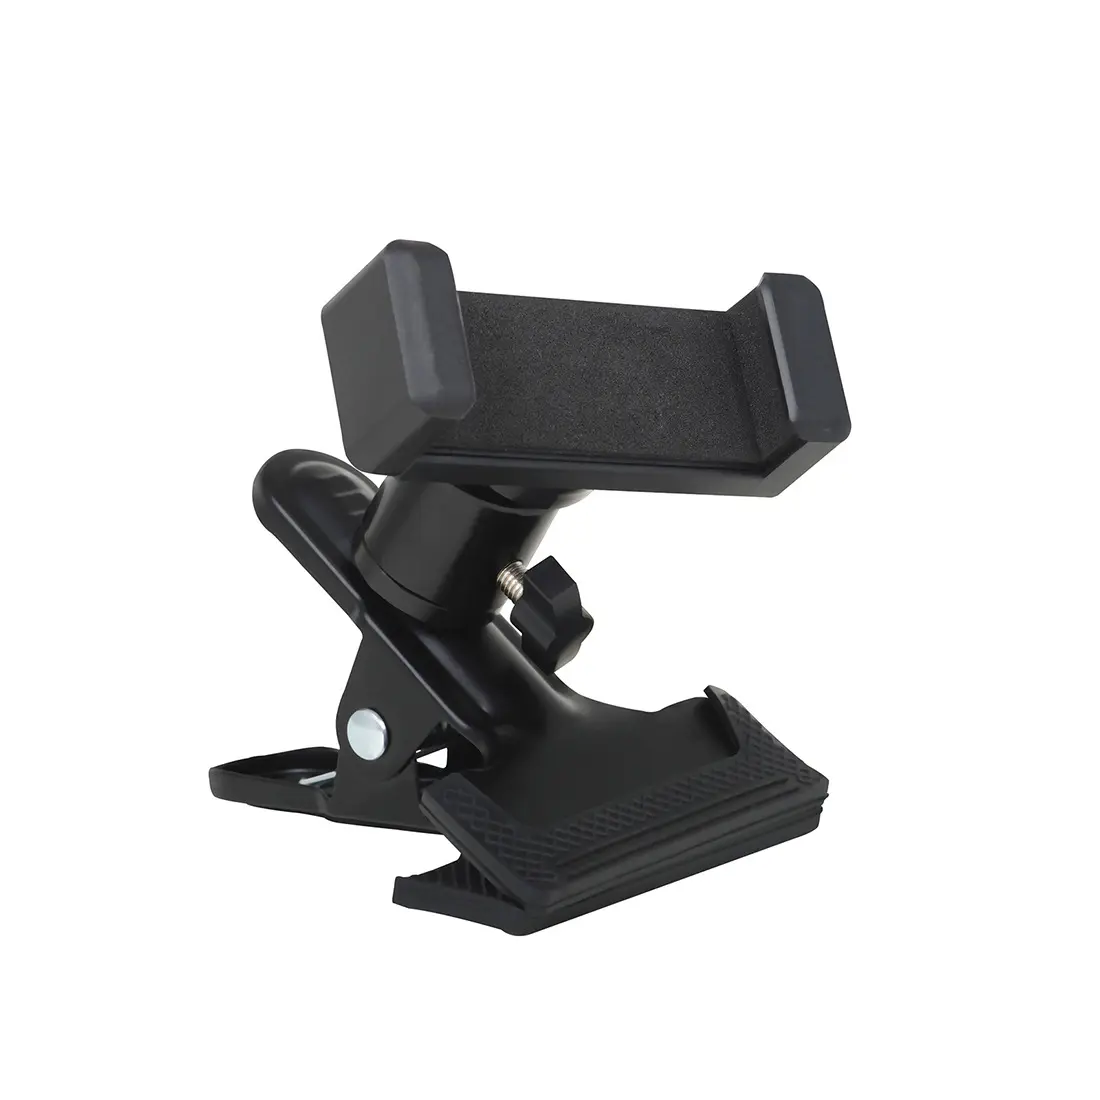 Guitar Head Mobile Phone Holder Clip Live Broadcast Bracket Stand Mobile Phone Tripod Clip Head for iPhone Samsung Smart Phones